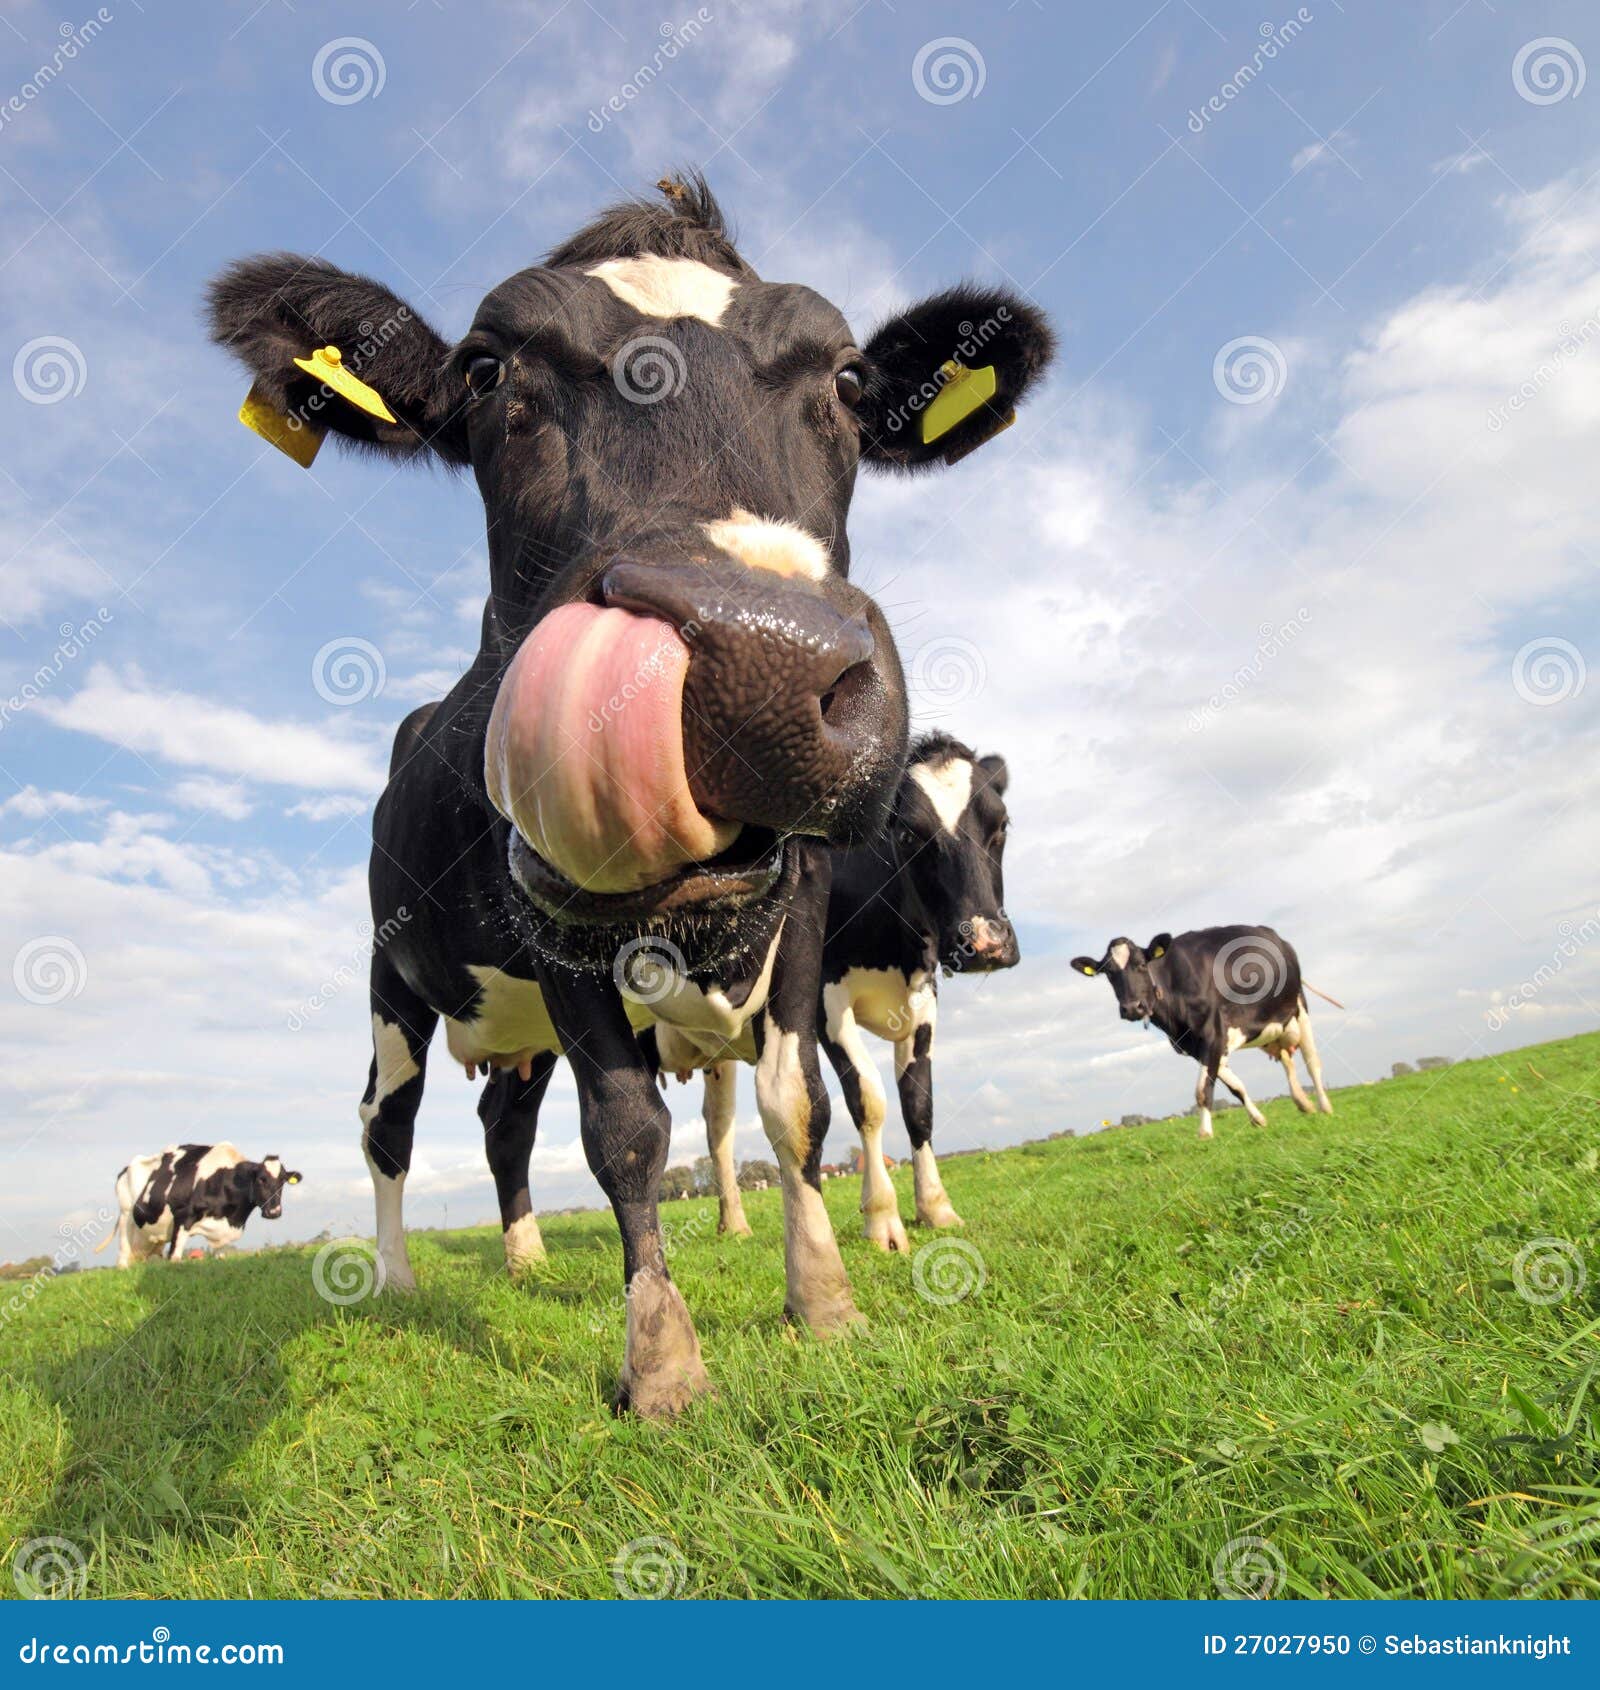 Funny Cow Stock Photo - Image: 27027950